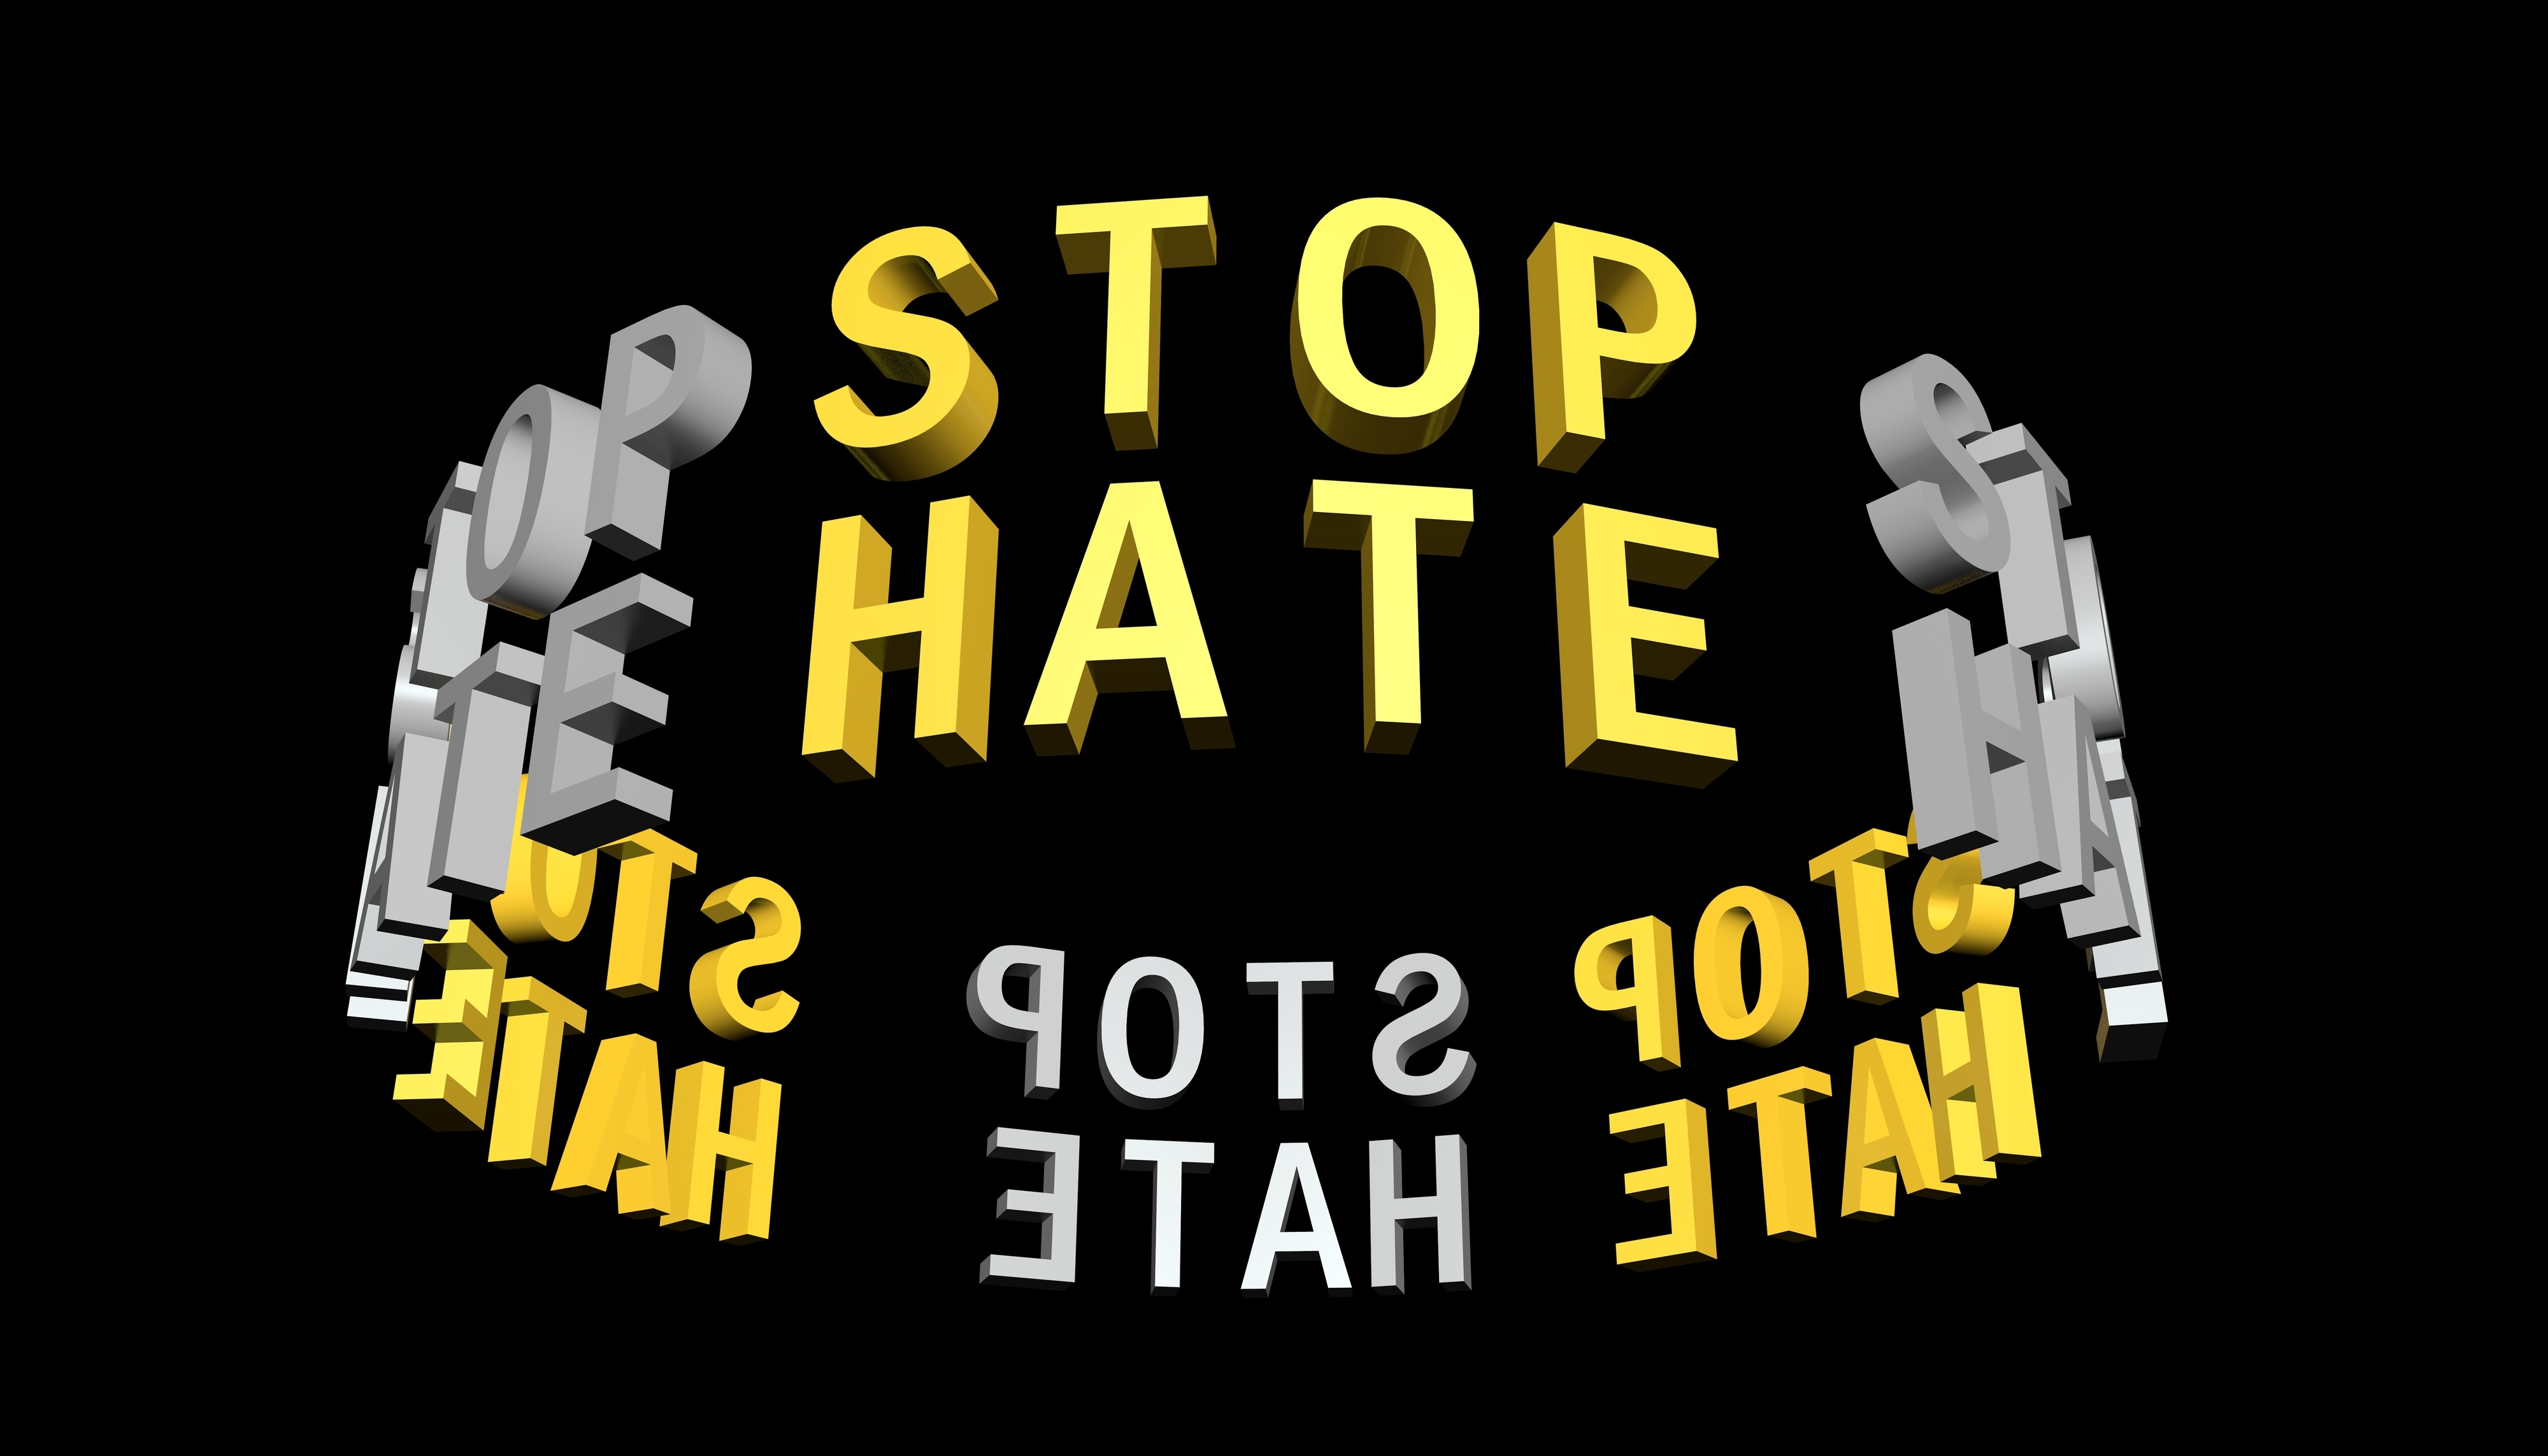 An illustration that says &quot;STOP HATE&quot;